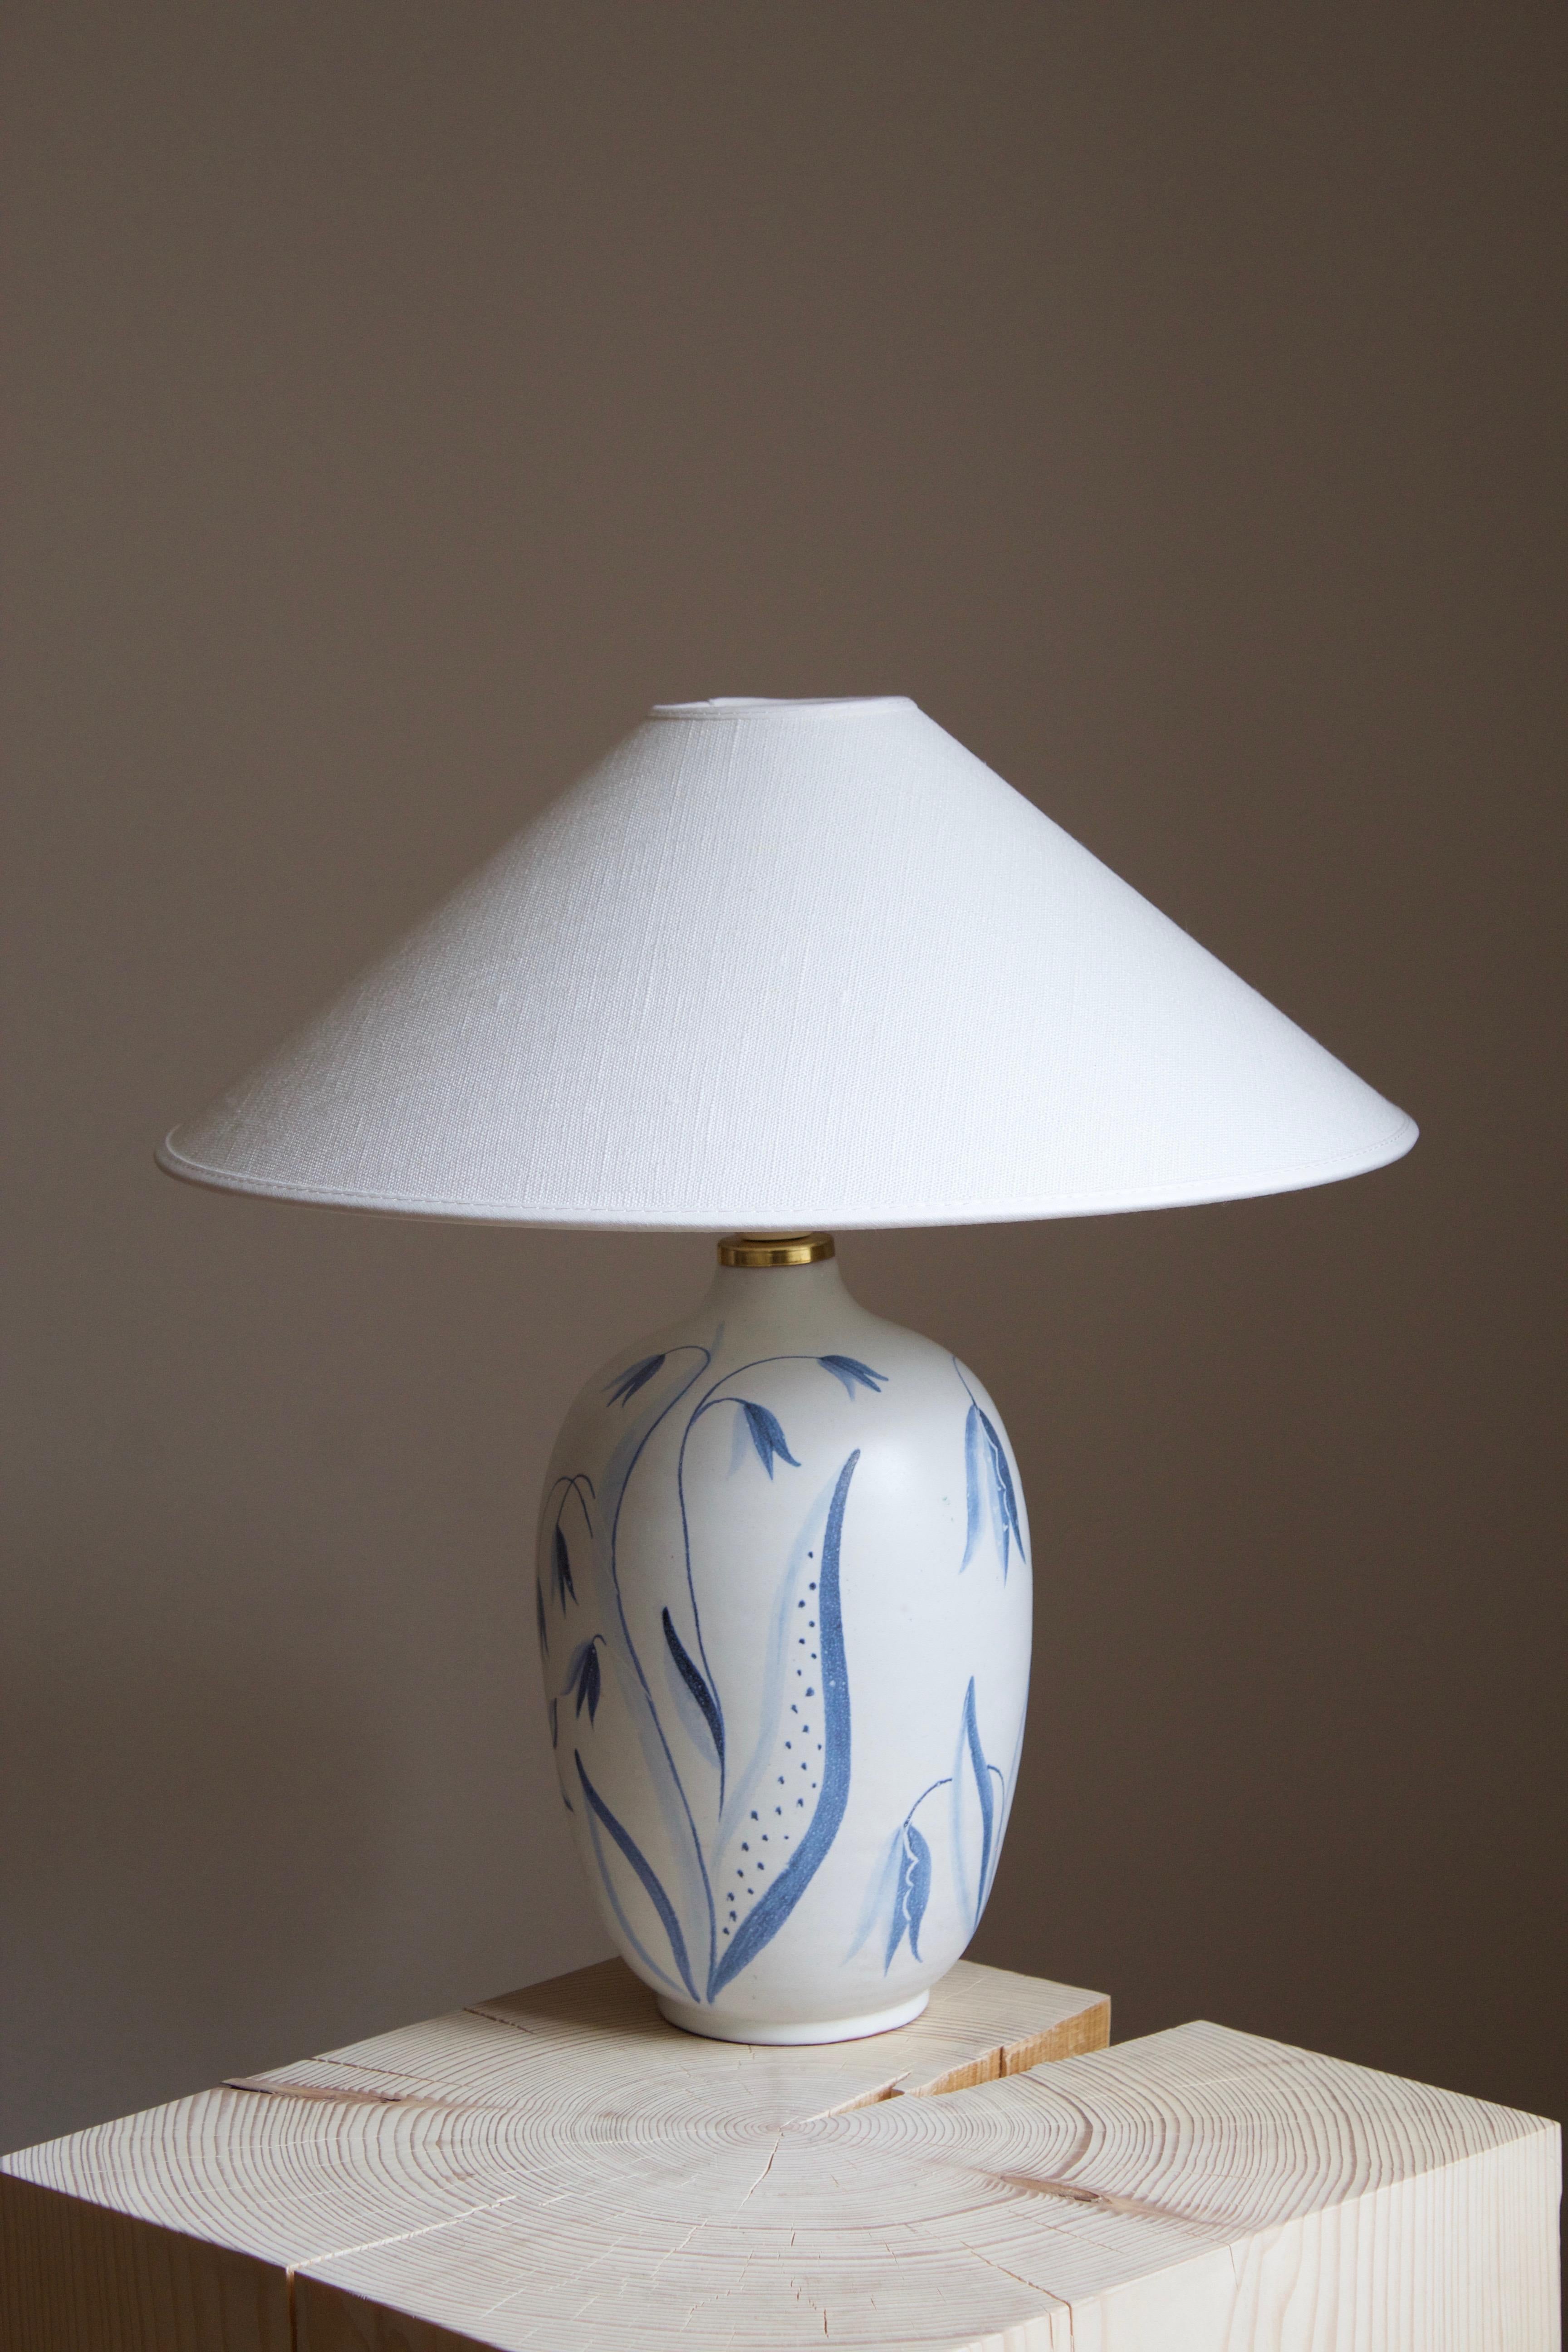 An early modernist table lamp model Flora. Designed by Anna-Lisa Thomson, for Upsala-Ekeby, Sweden. With stamp including artist's initials. Only produced in 1949.

Sold without lampshade. Stated dimensions excluding lampshade.

Other designers